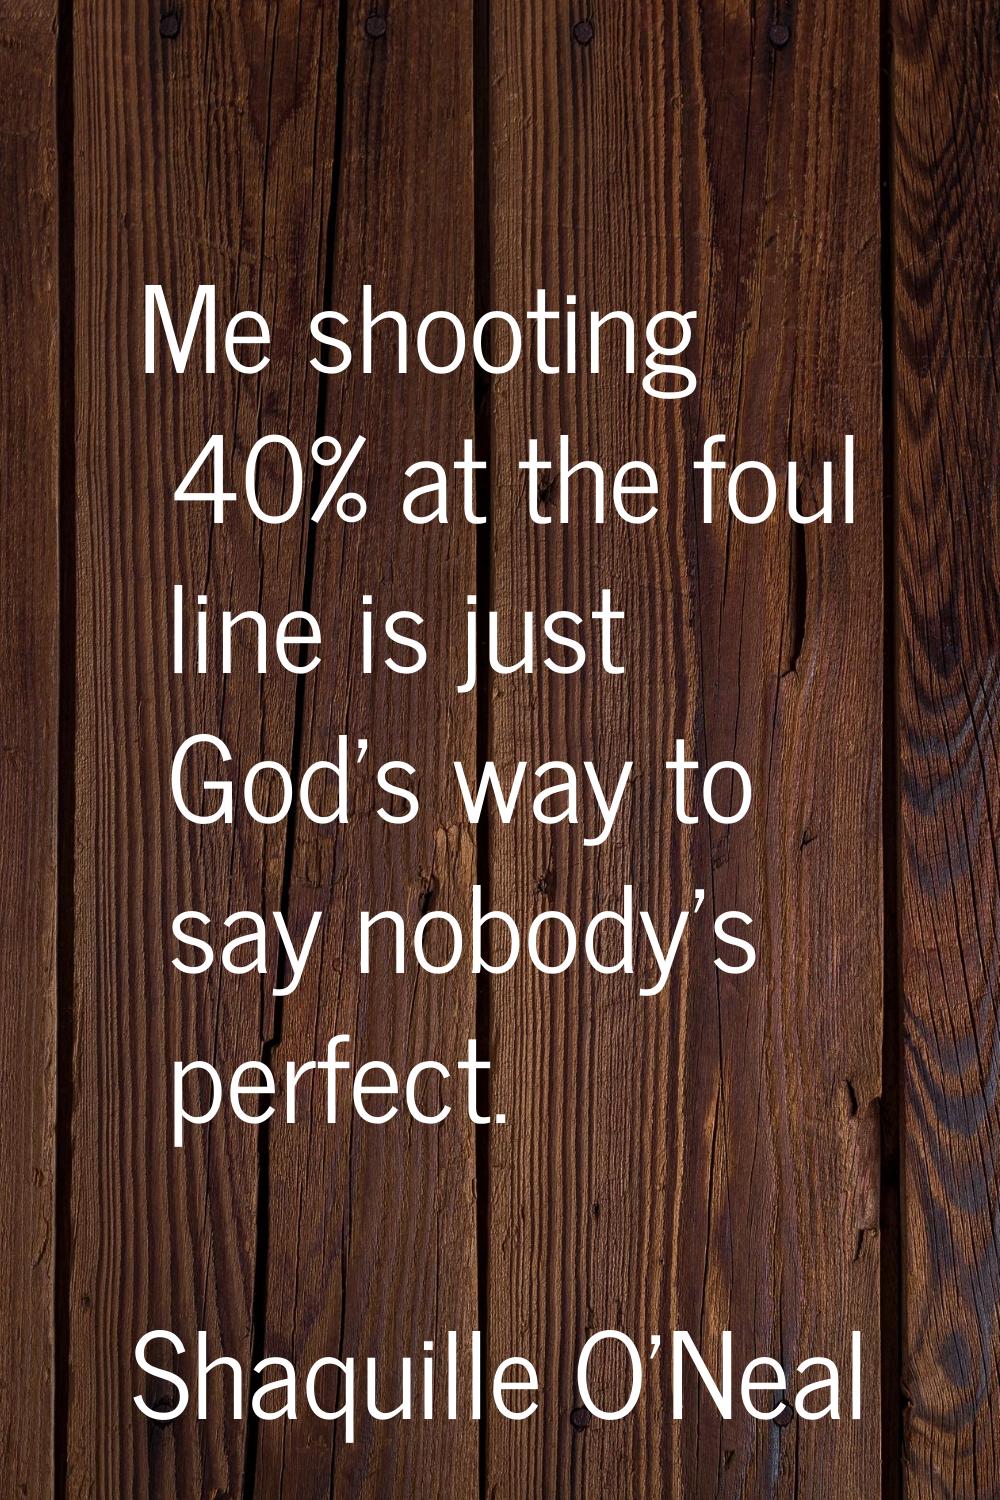 Me shooting 40% at the foul line is just God's way to say nobody's perfect.